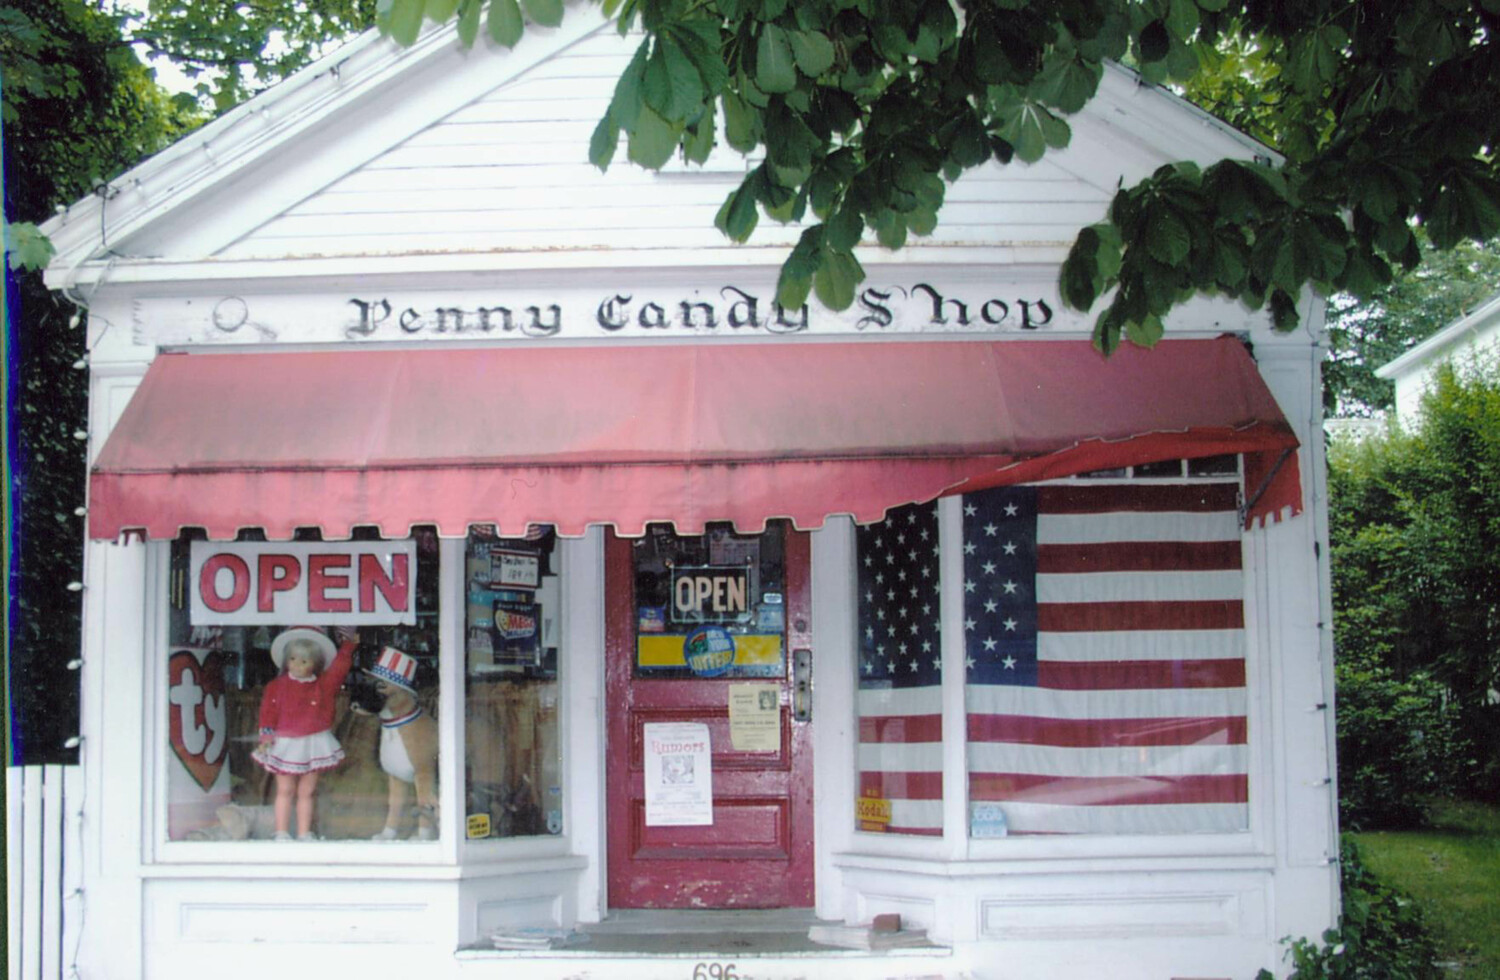 The Penny Candy Shop in June of 2002.